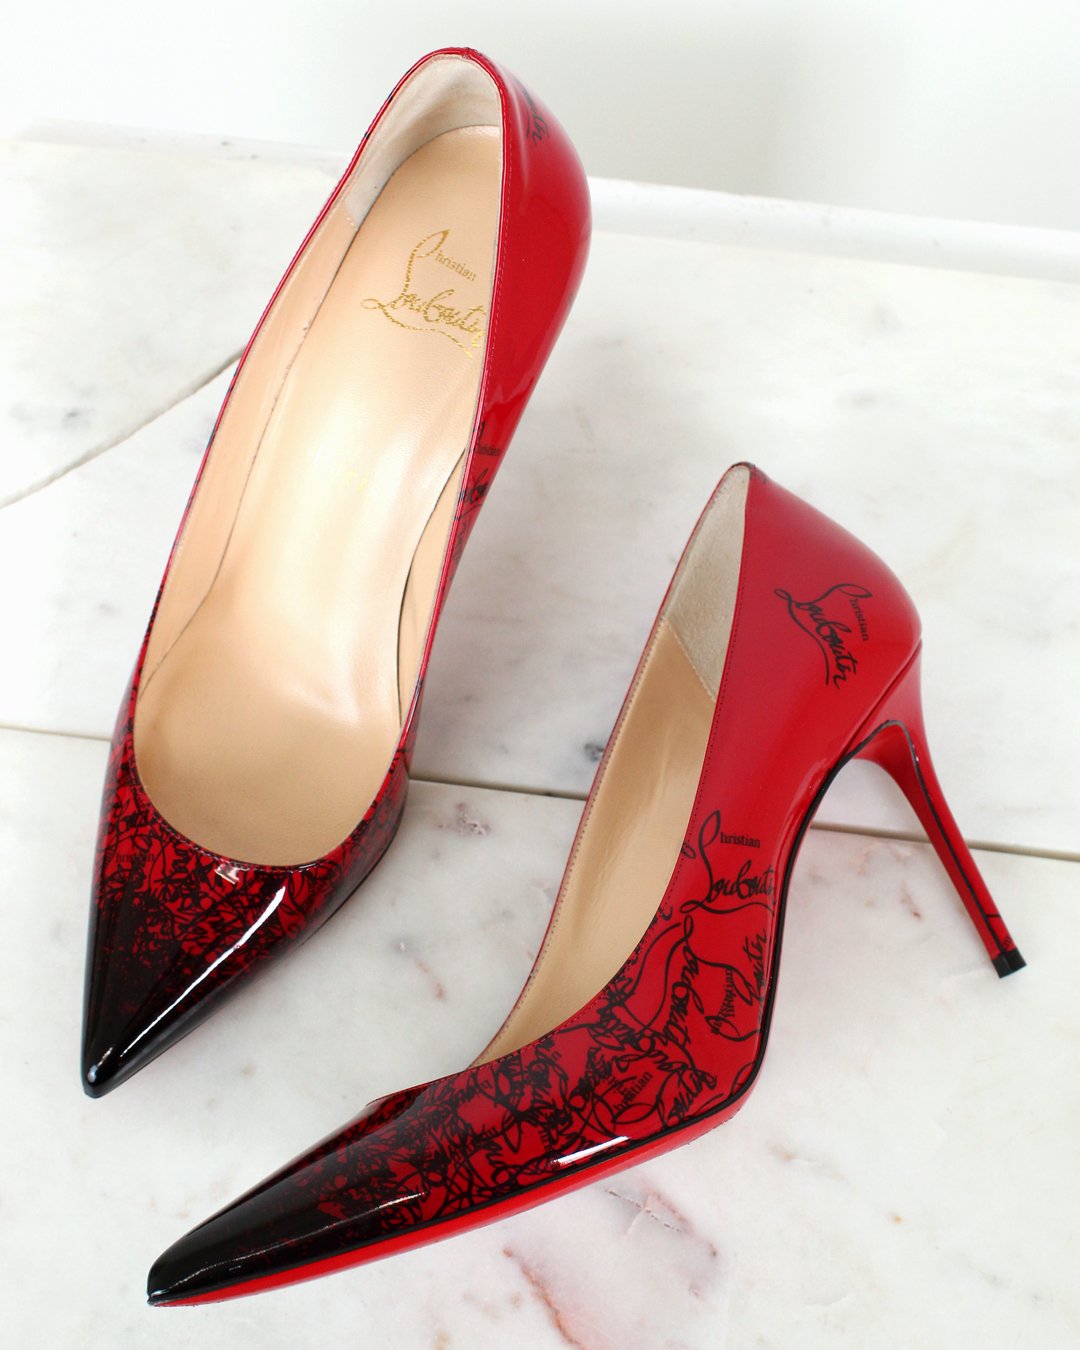 Louboutin Shoes for Women  Buy or Sell your Designer Shoes